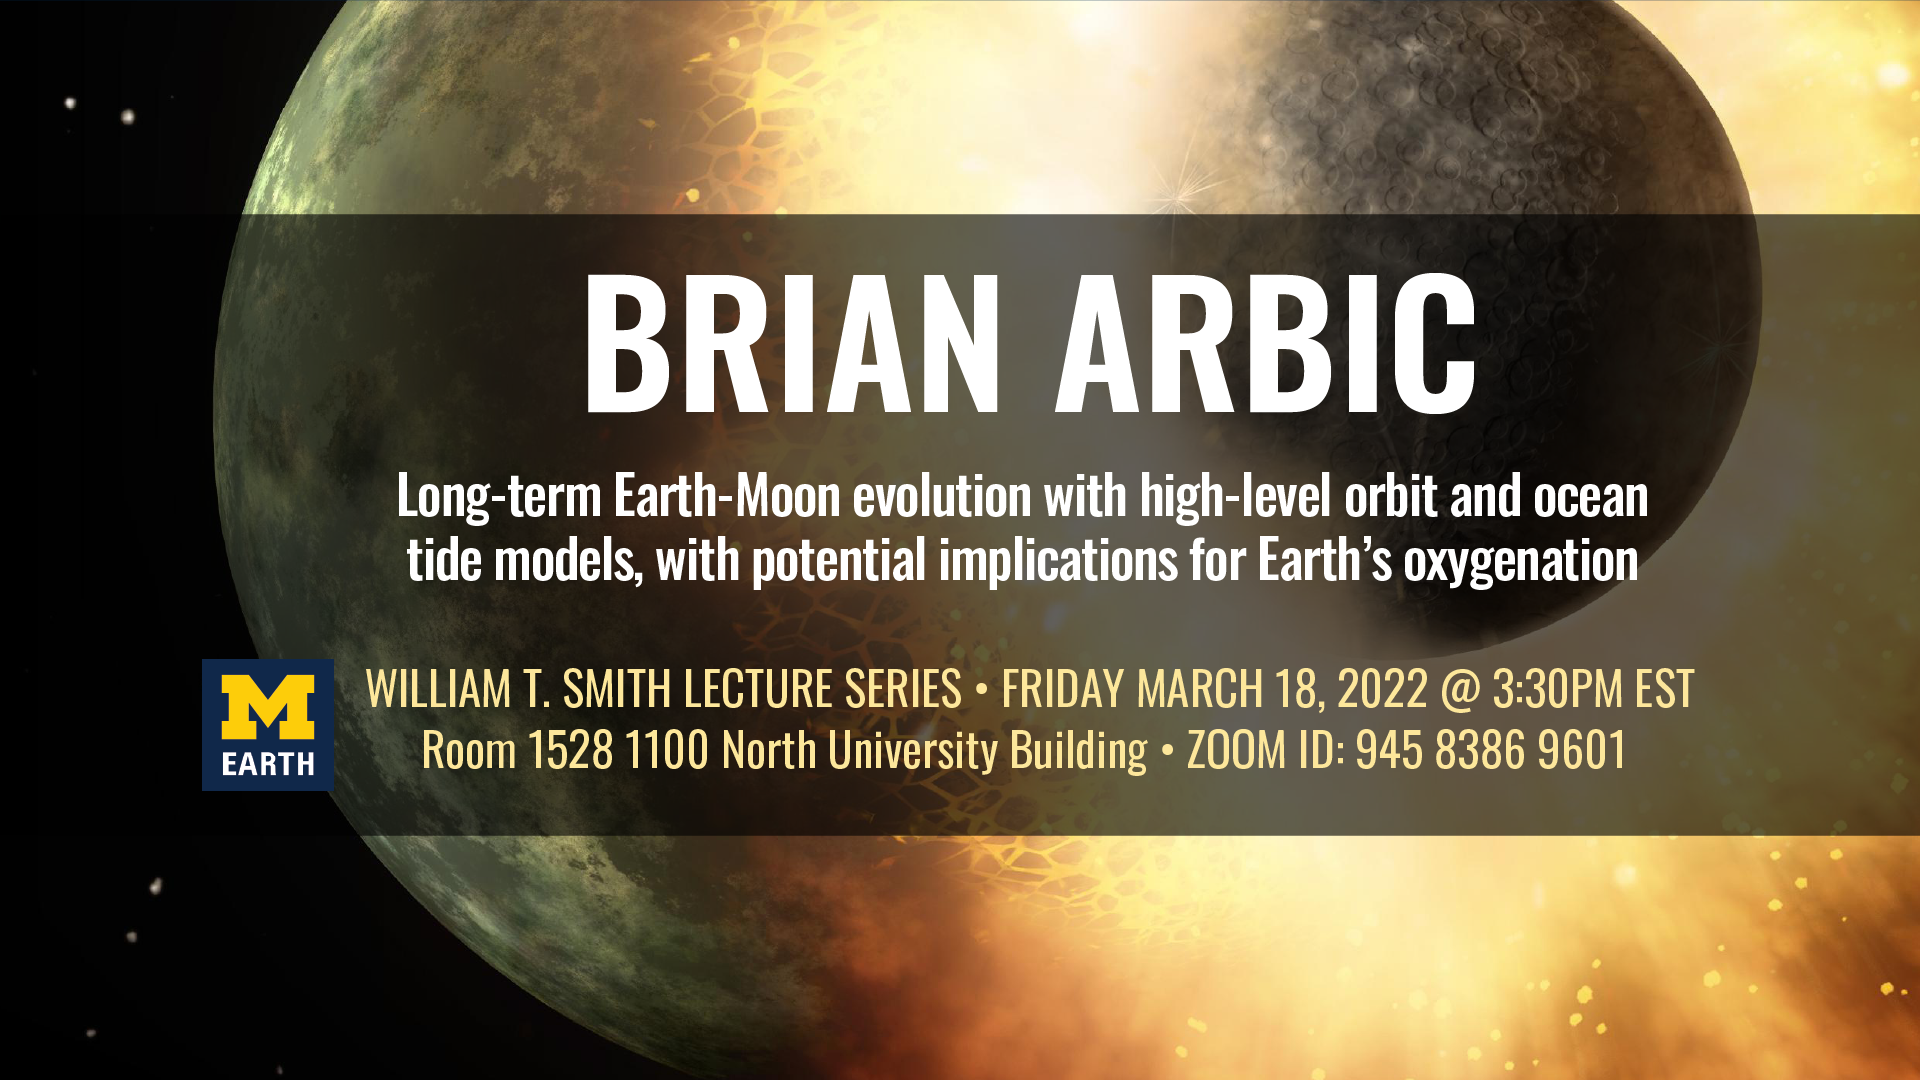 Announcement for Smith Lecture at the University of Michigan by Brian Arbic with two planets colliding